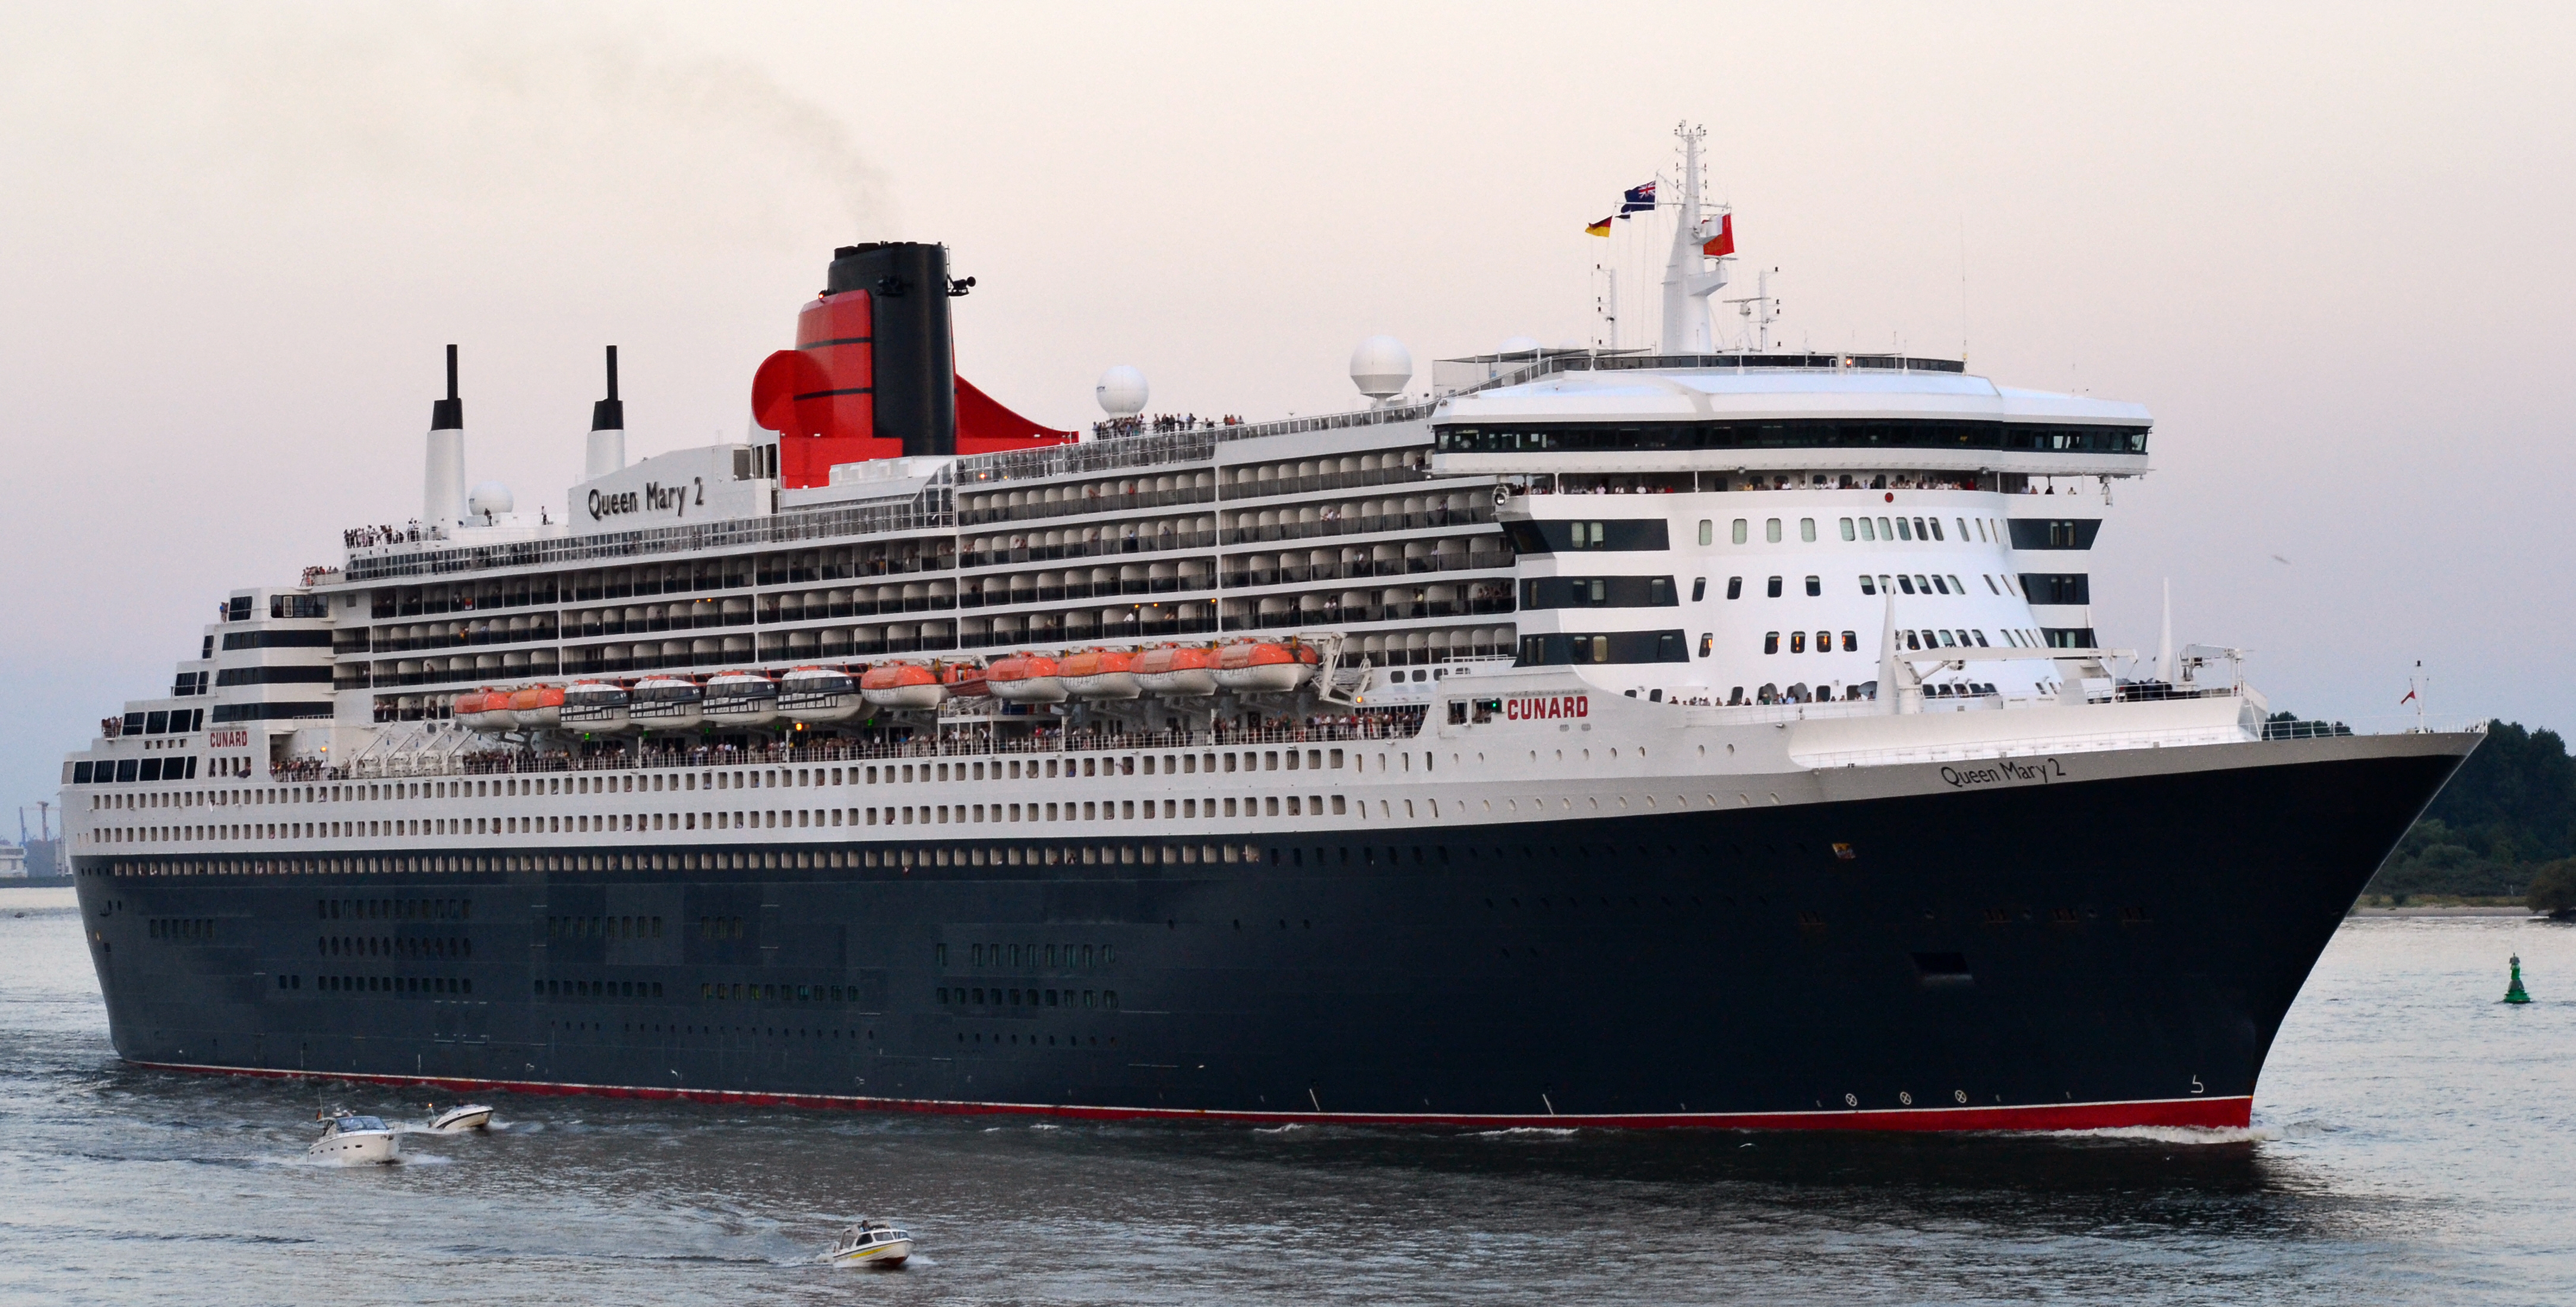 FileQueen Mary 2 11.jpg Wikimedia Commons